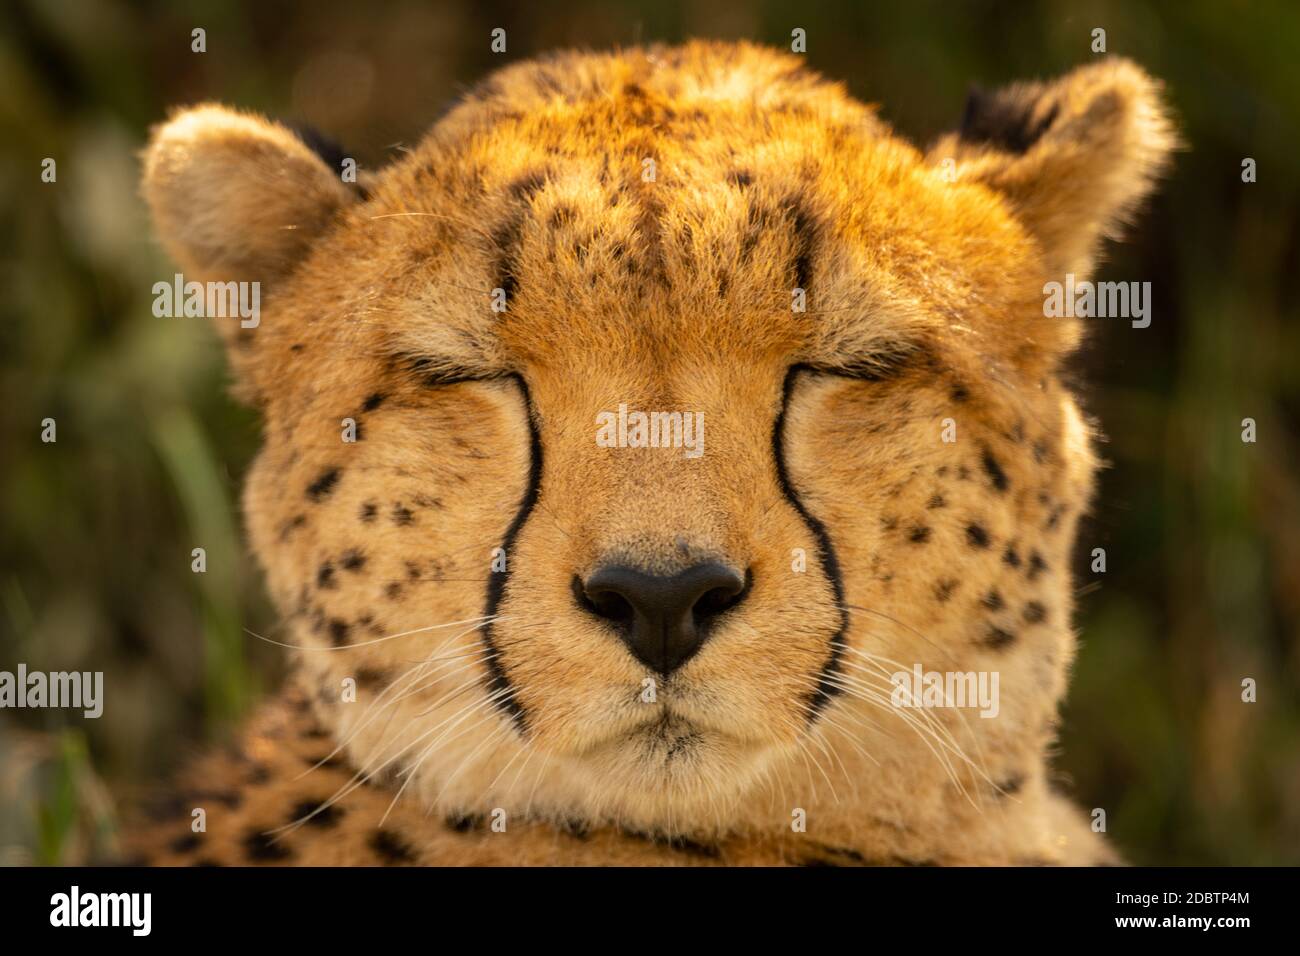 Close-up of cheetah head with eyes closed Stock Photo